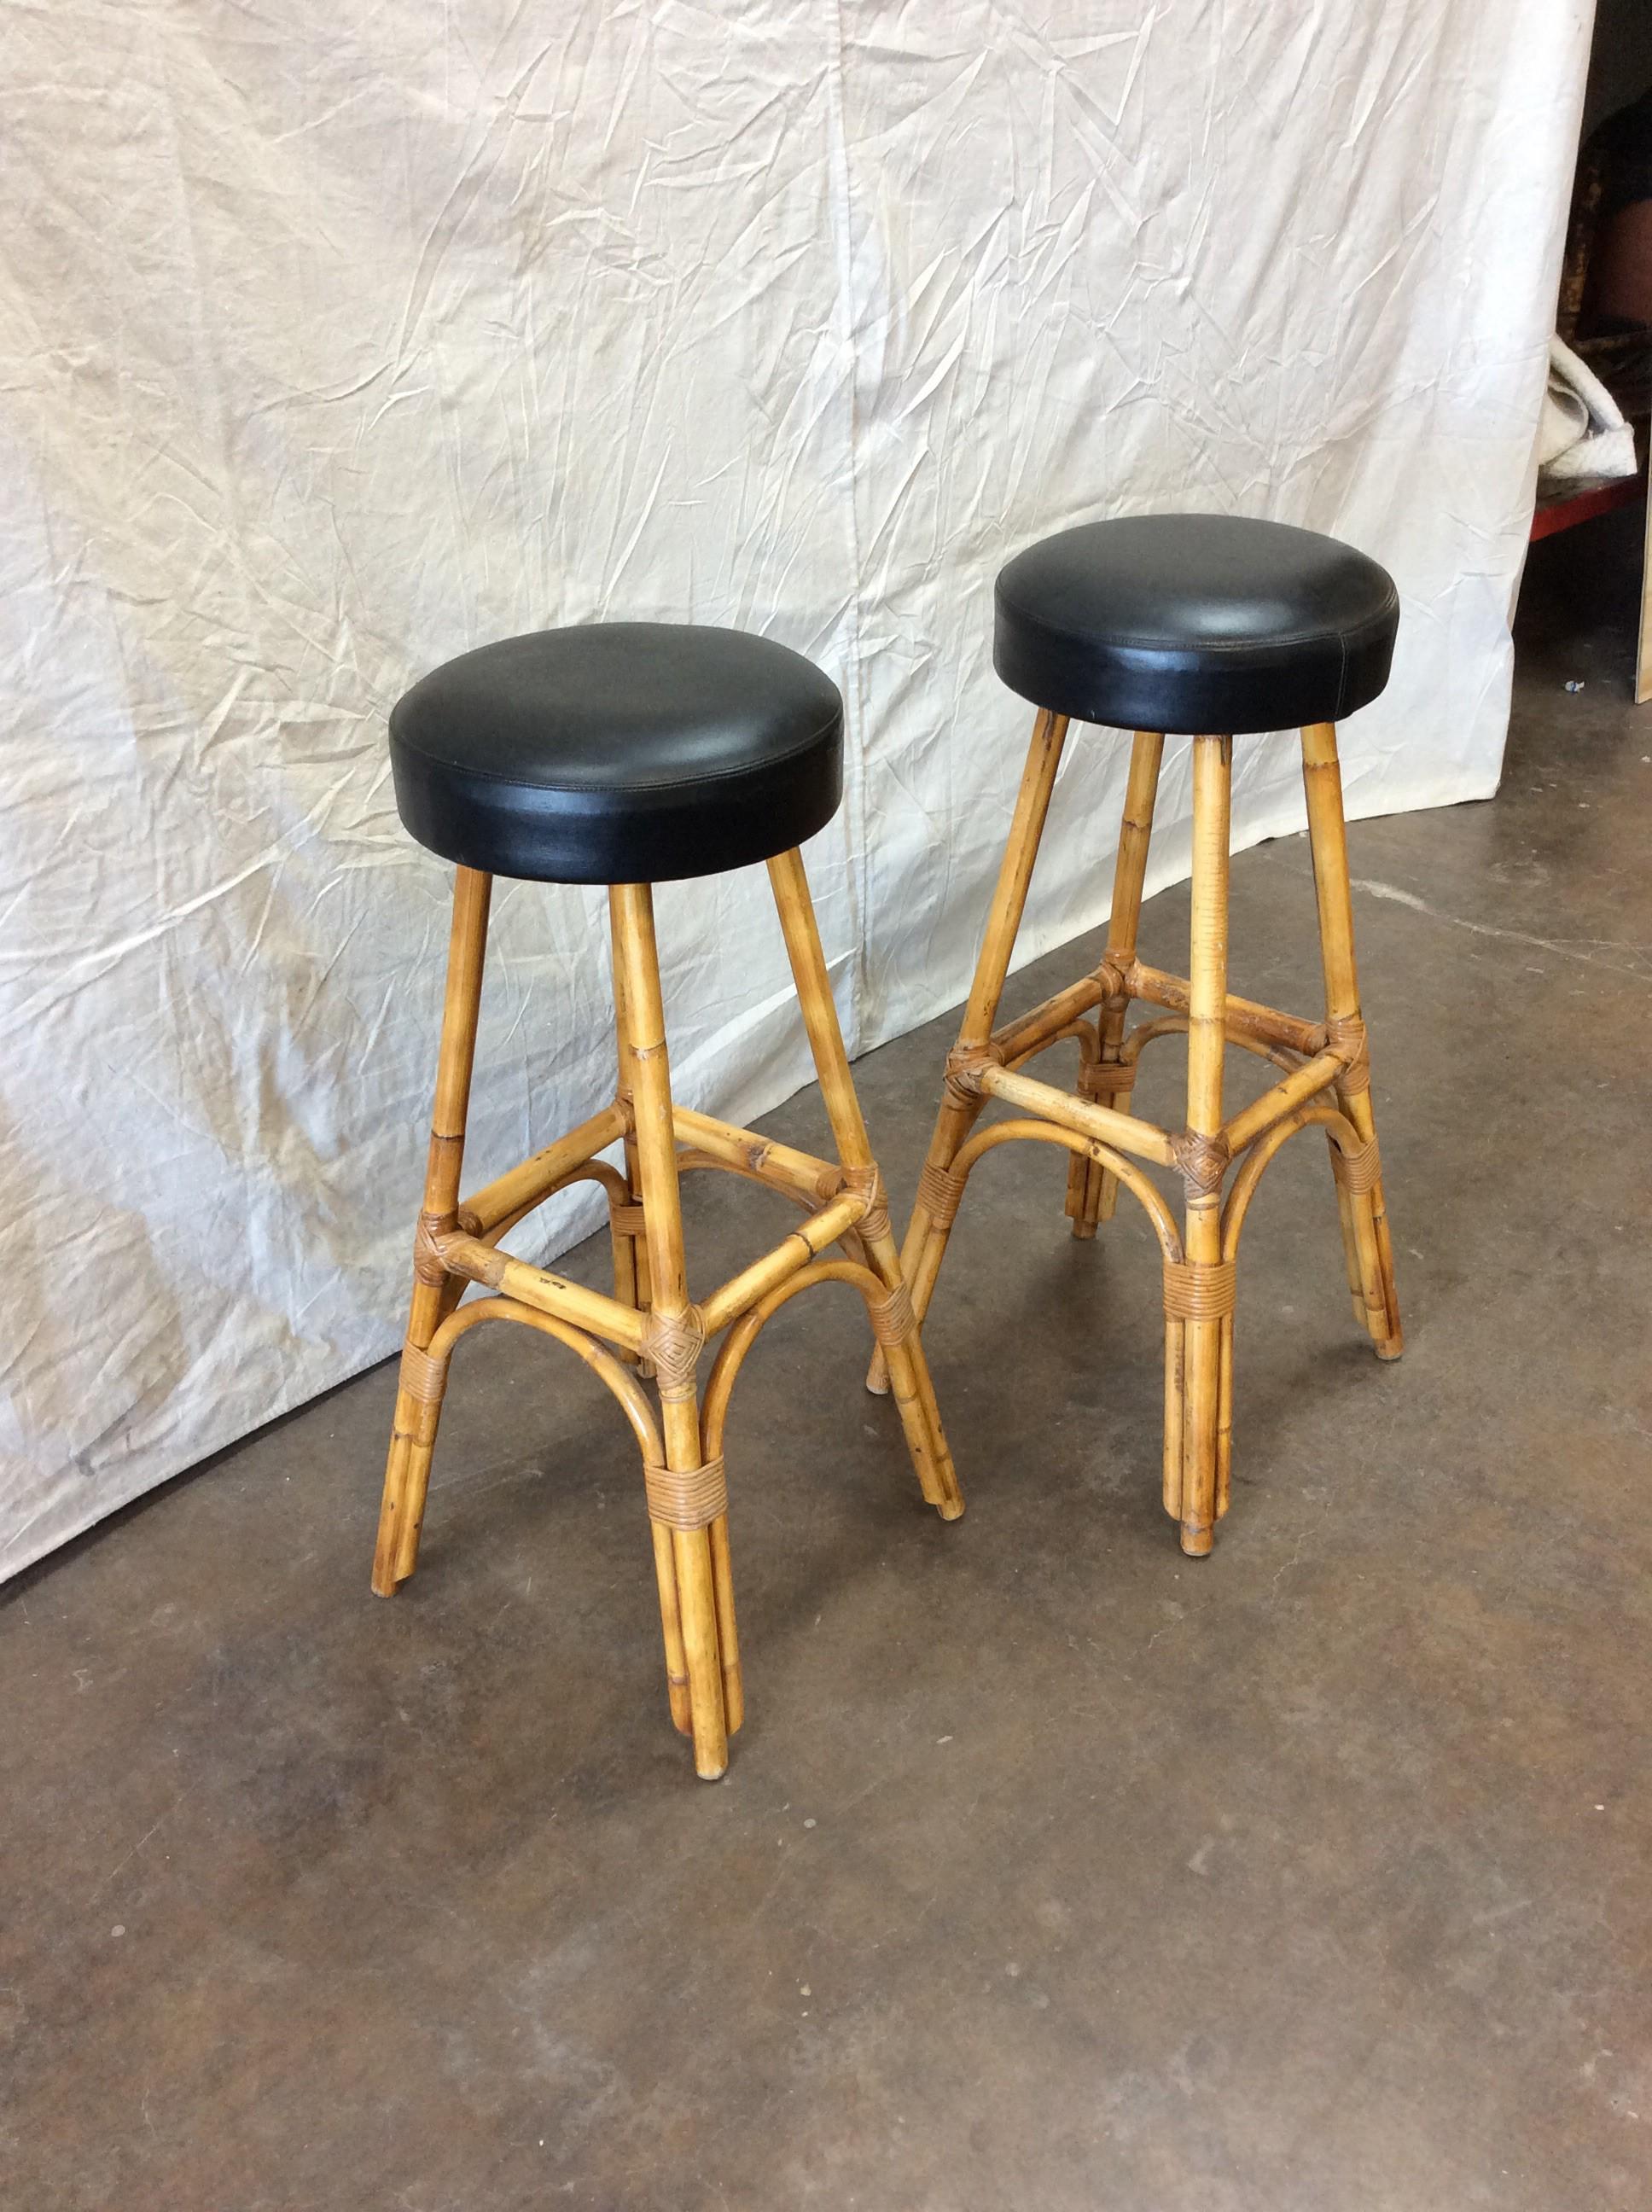 1950s French Rattan and Bamboo Bar Stools - a Pair For Sale 7